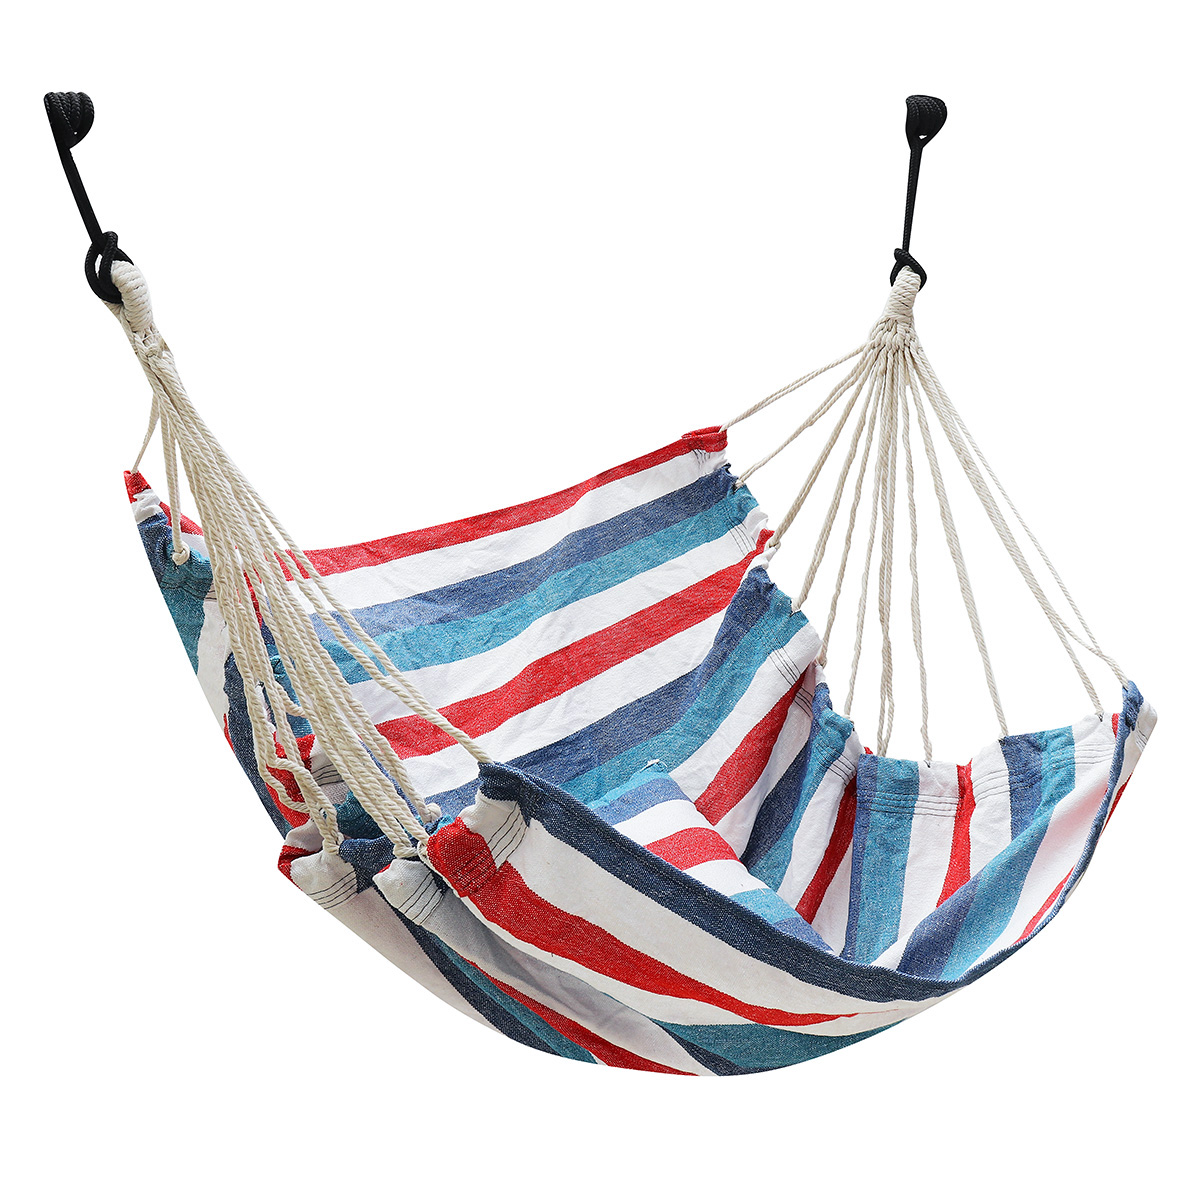 39x51in-Hammock-Chair-Comfortable-Easy-Install-Hanging-Swing-Seat-with-2-Pillow-Outdoor-Indoor-Campi-1731884-6